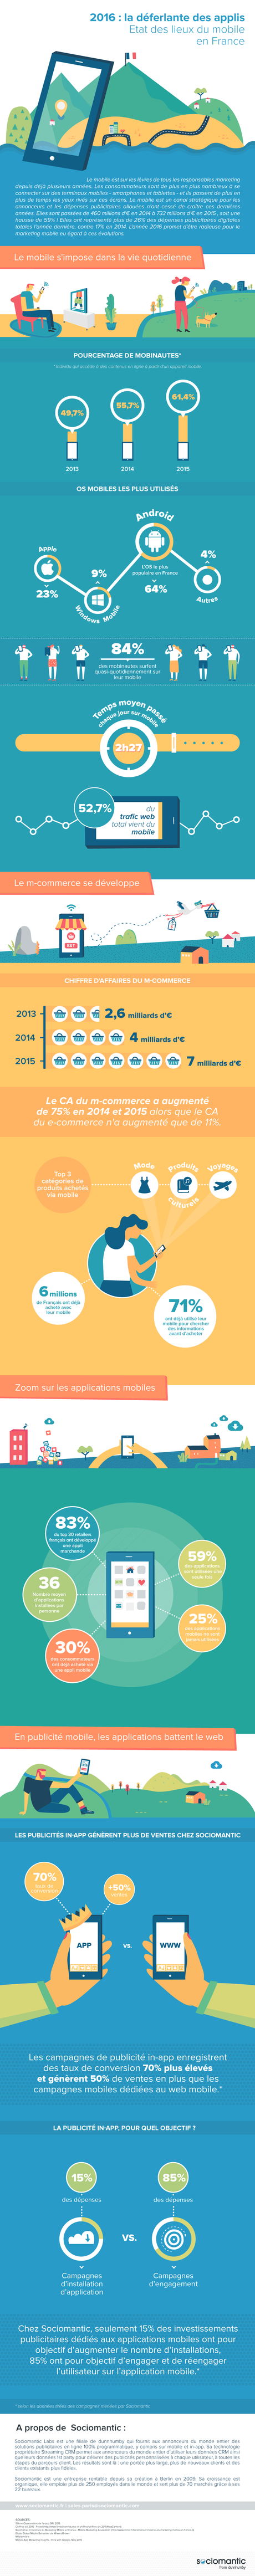 infographie-mobile-2016